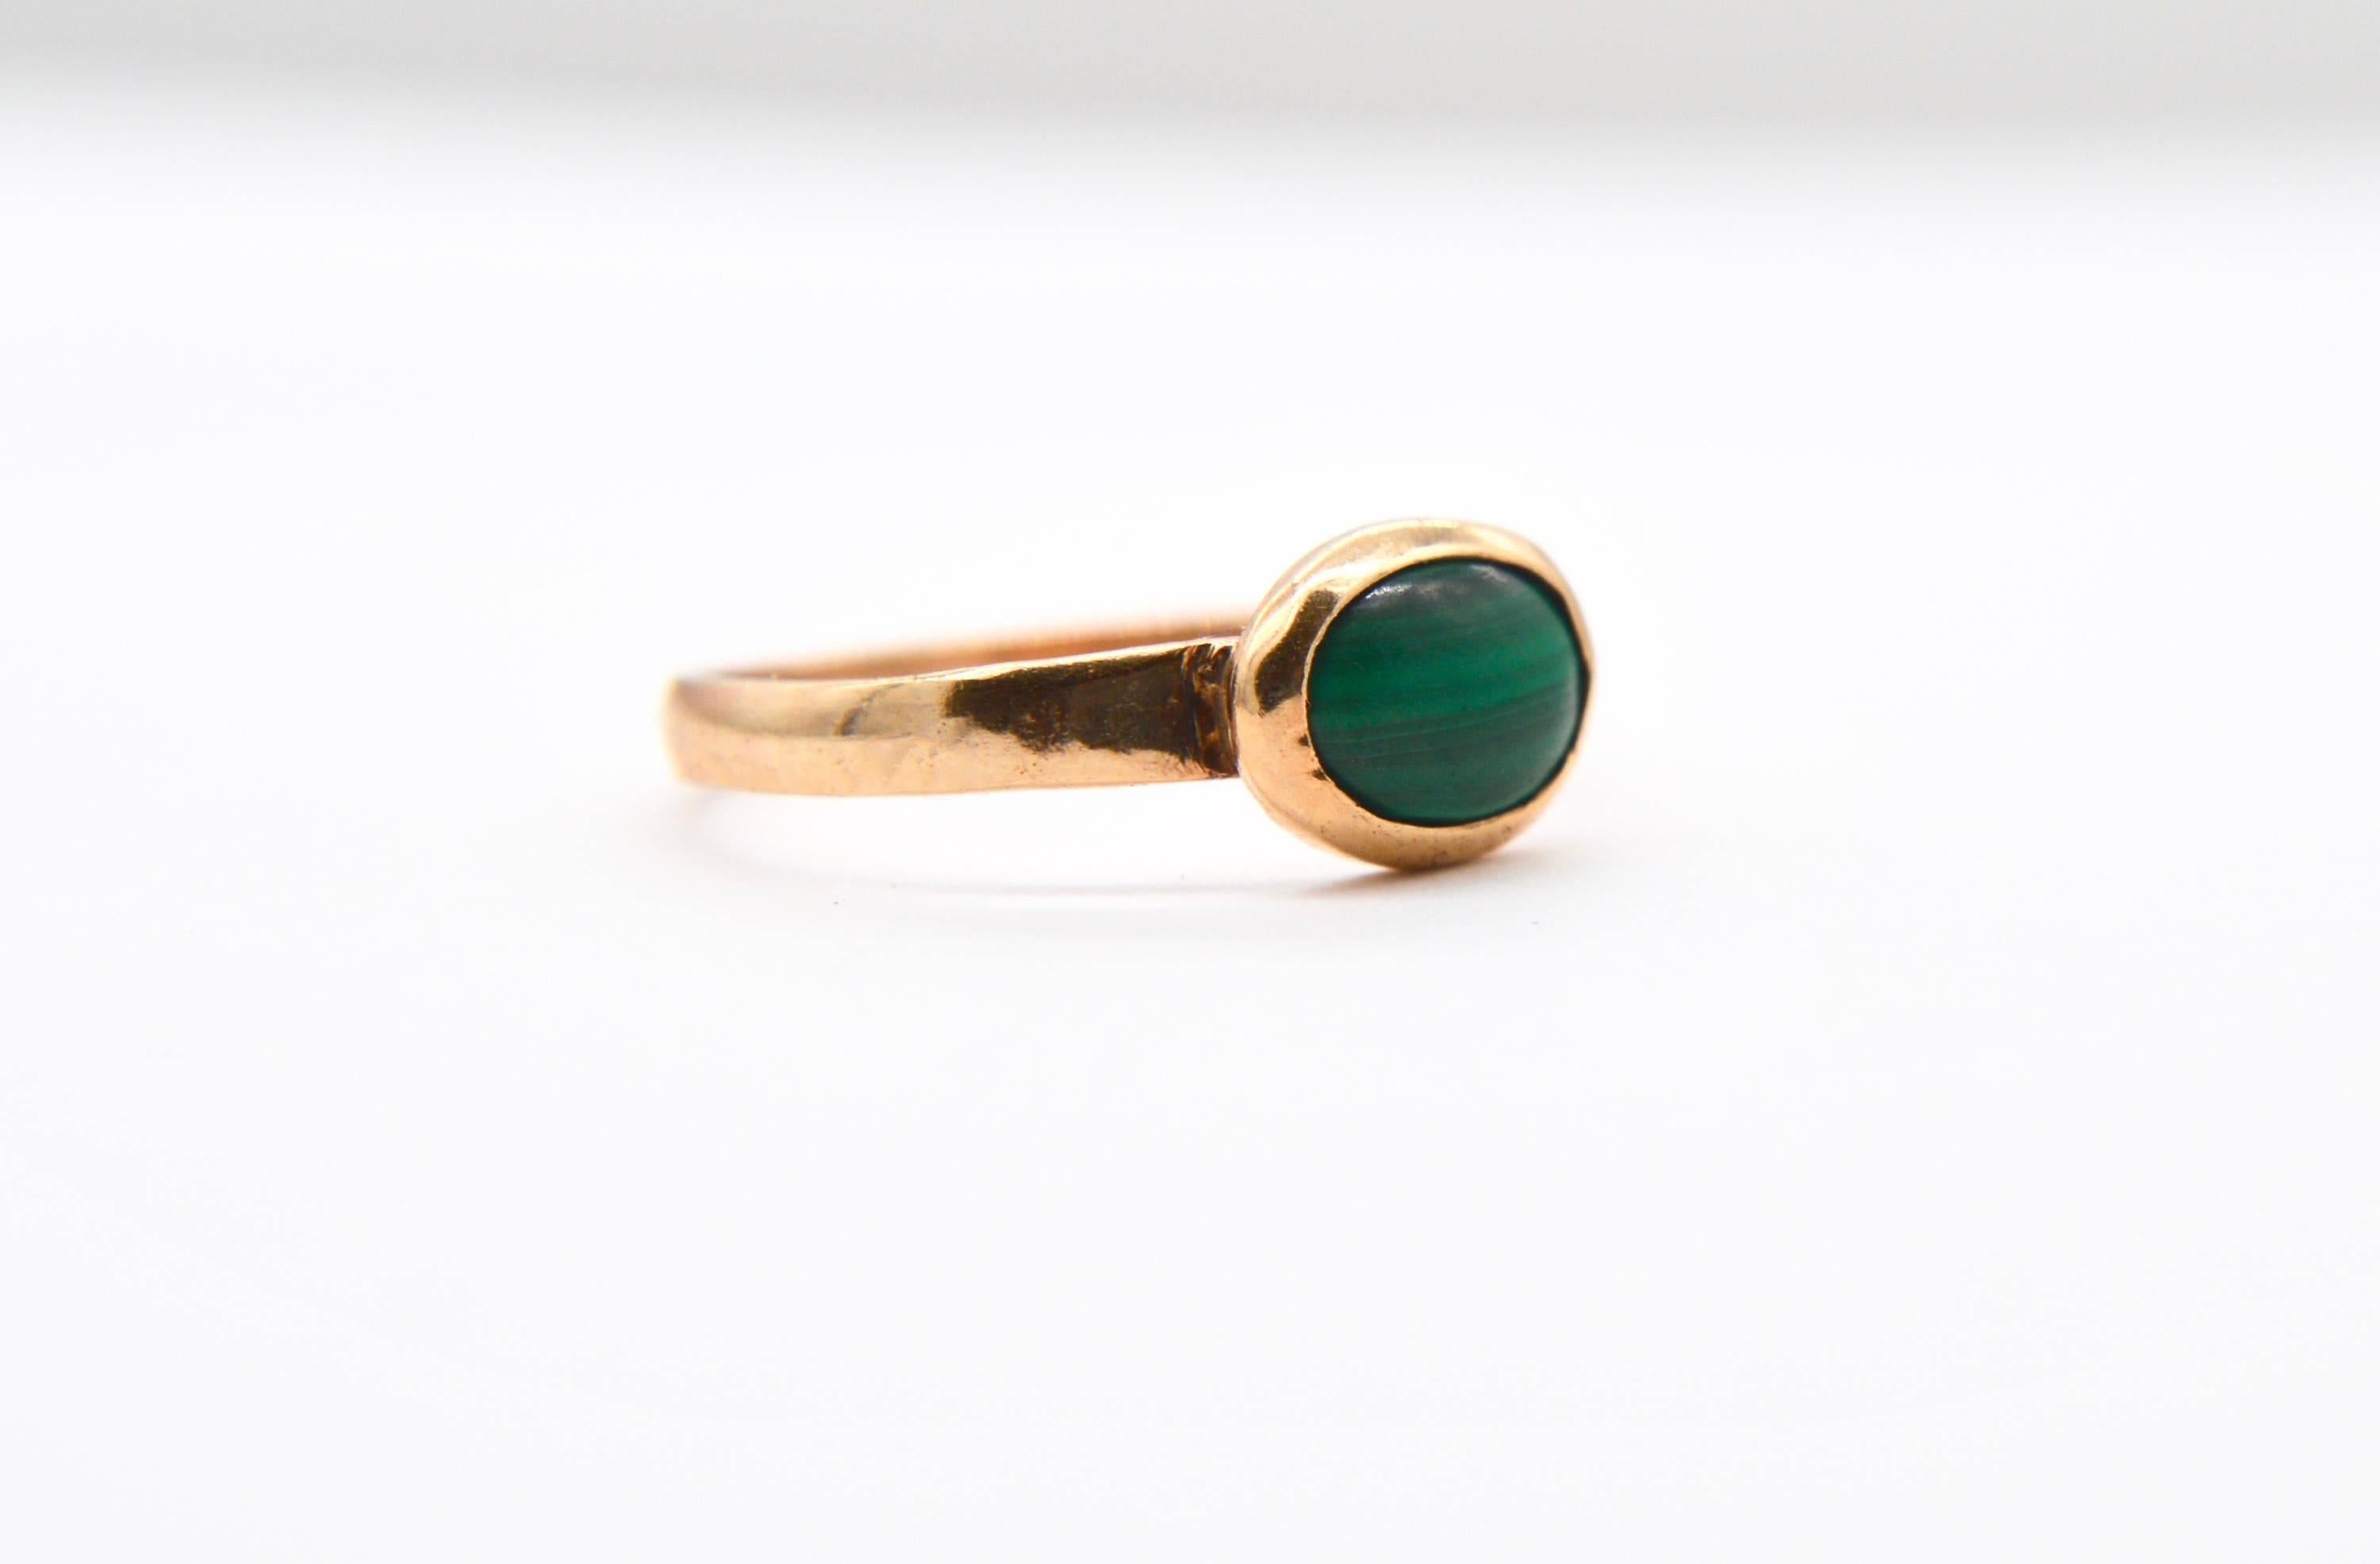 Gorgeous antique Victorian era late 1800s malachite 9K yellow gold bezel set ring, hallmarked with SARK for Sark, Channel Islands UK. stamped 375 for 9K gold. In very good condition. Size 7, can be resized by a jeweler. Cabochon measures 7mm x 5mm,